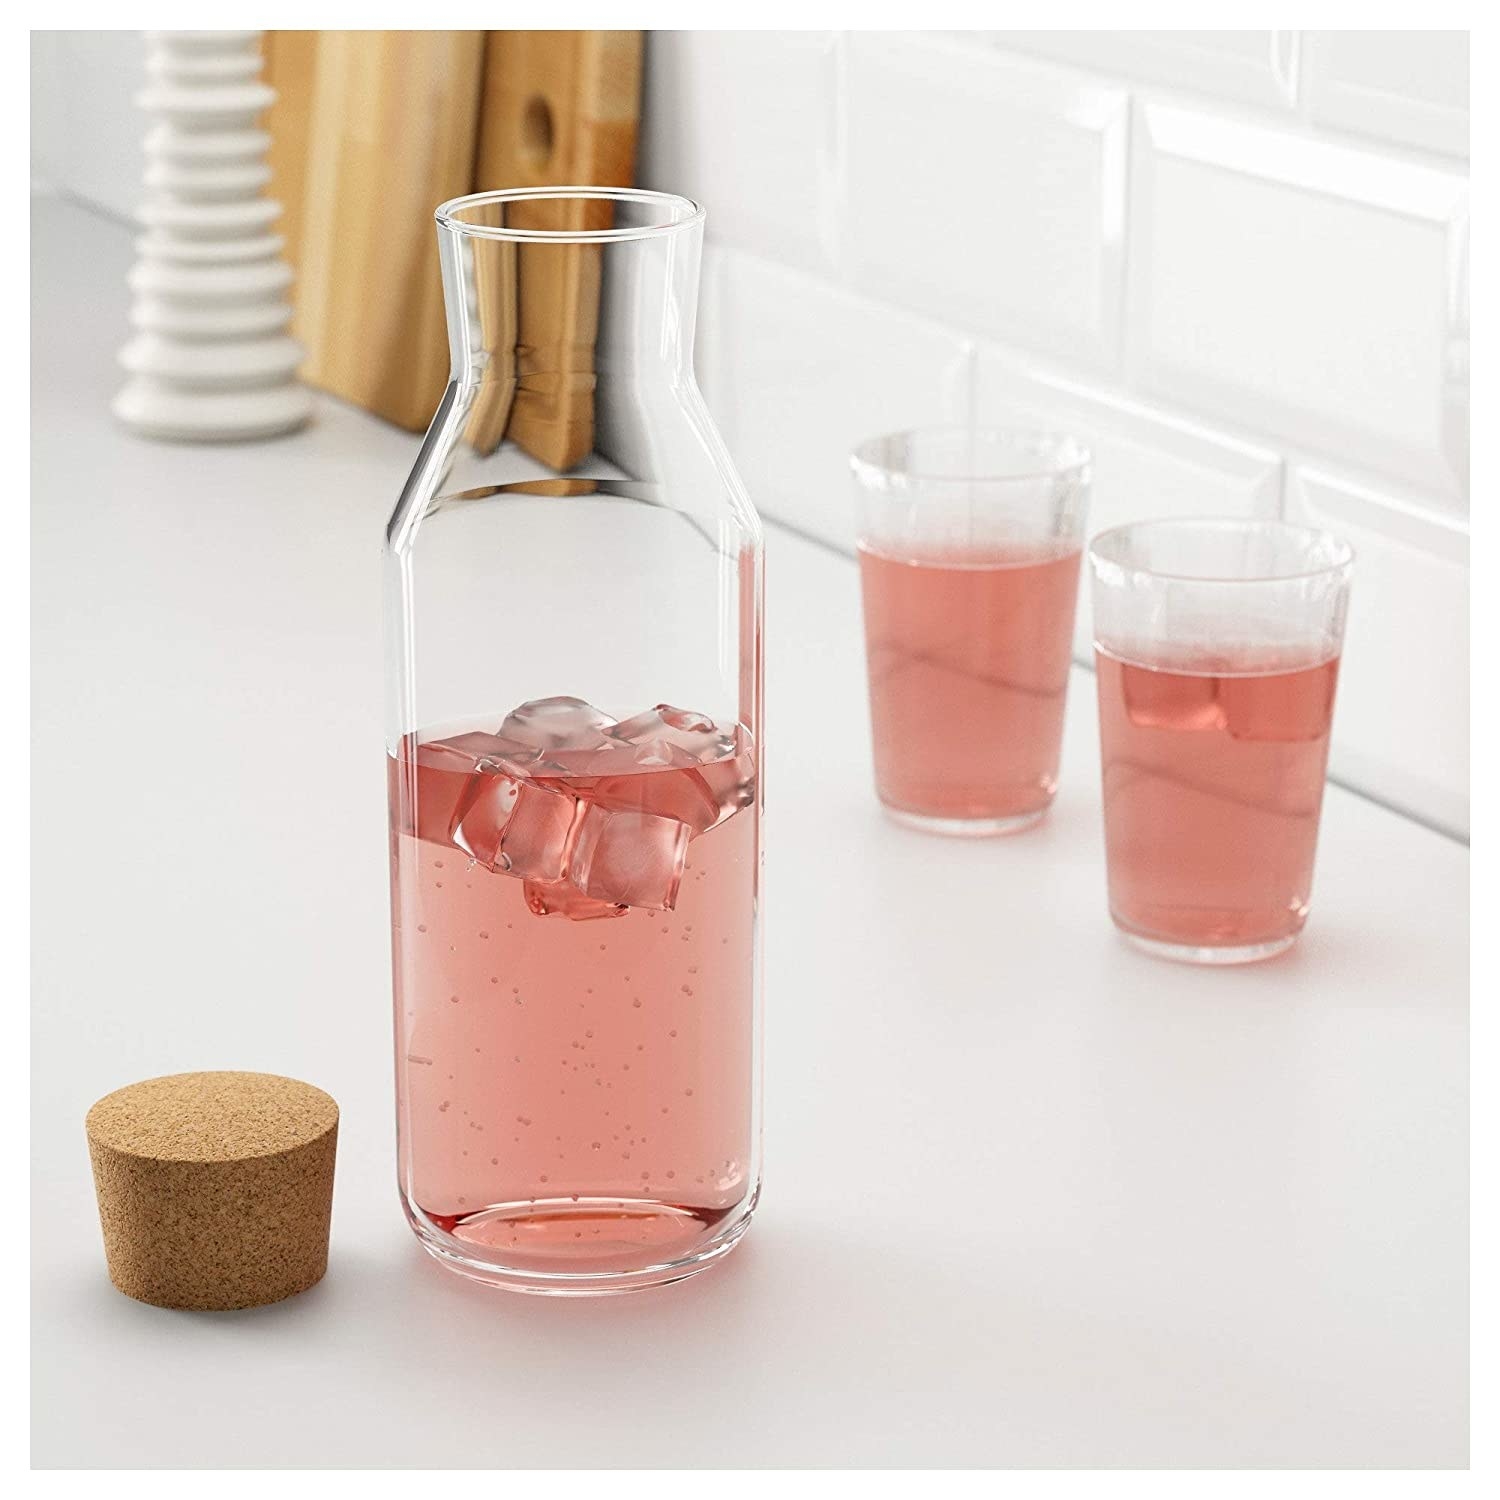 A glass pitcher with a pink beverage in it